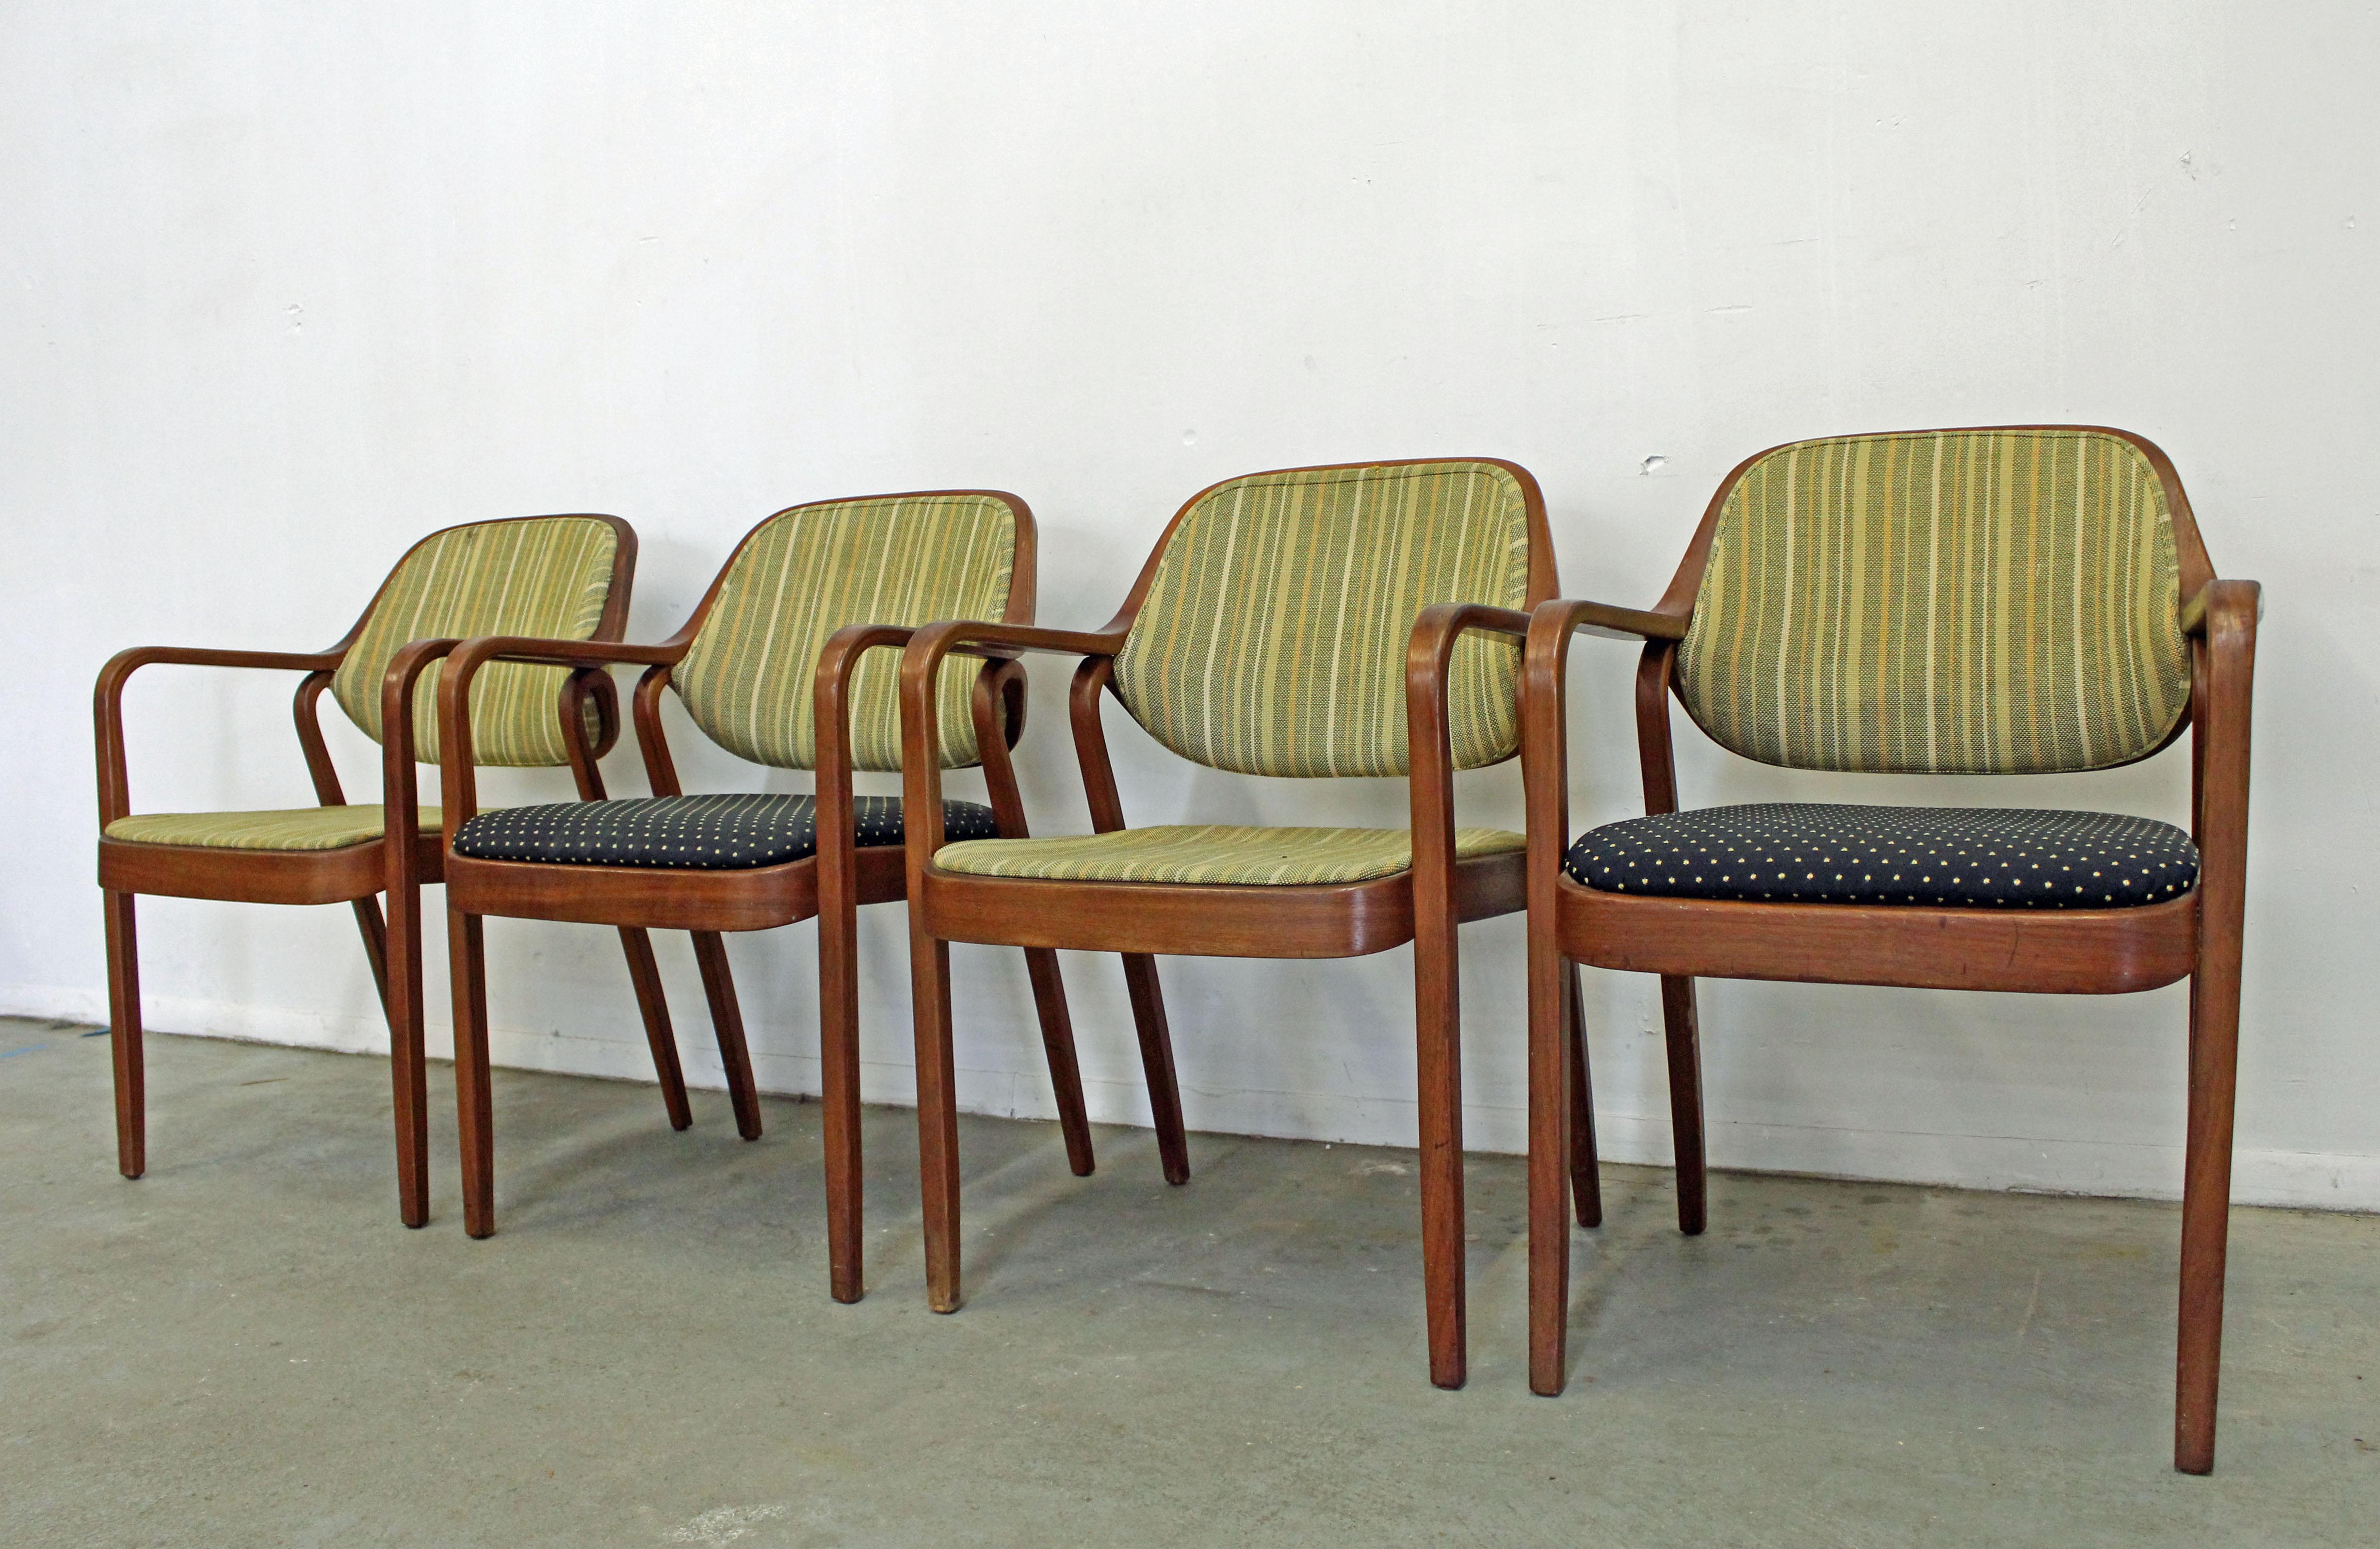 What a find. Offered is a set of 4 dining arm chairs designed by Don Pettit for Knoll International. The chairs are structurally sound, in decent condition with cosmetic age wear. They have some surface scratches and age wear on the upholstery (see